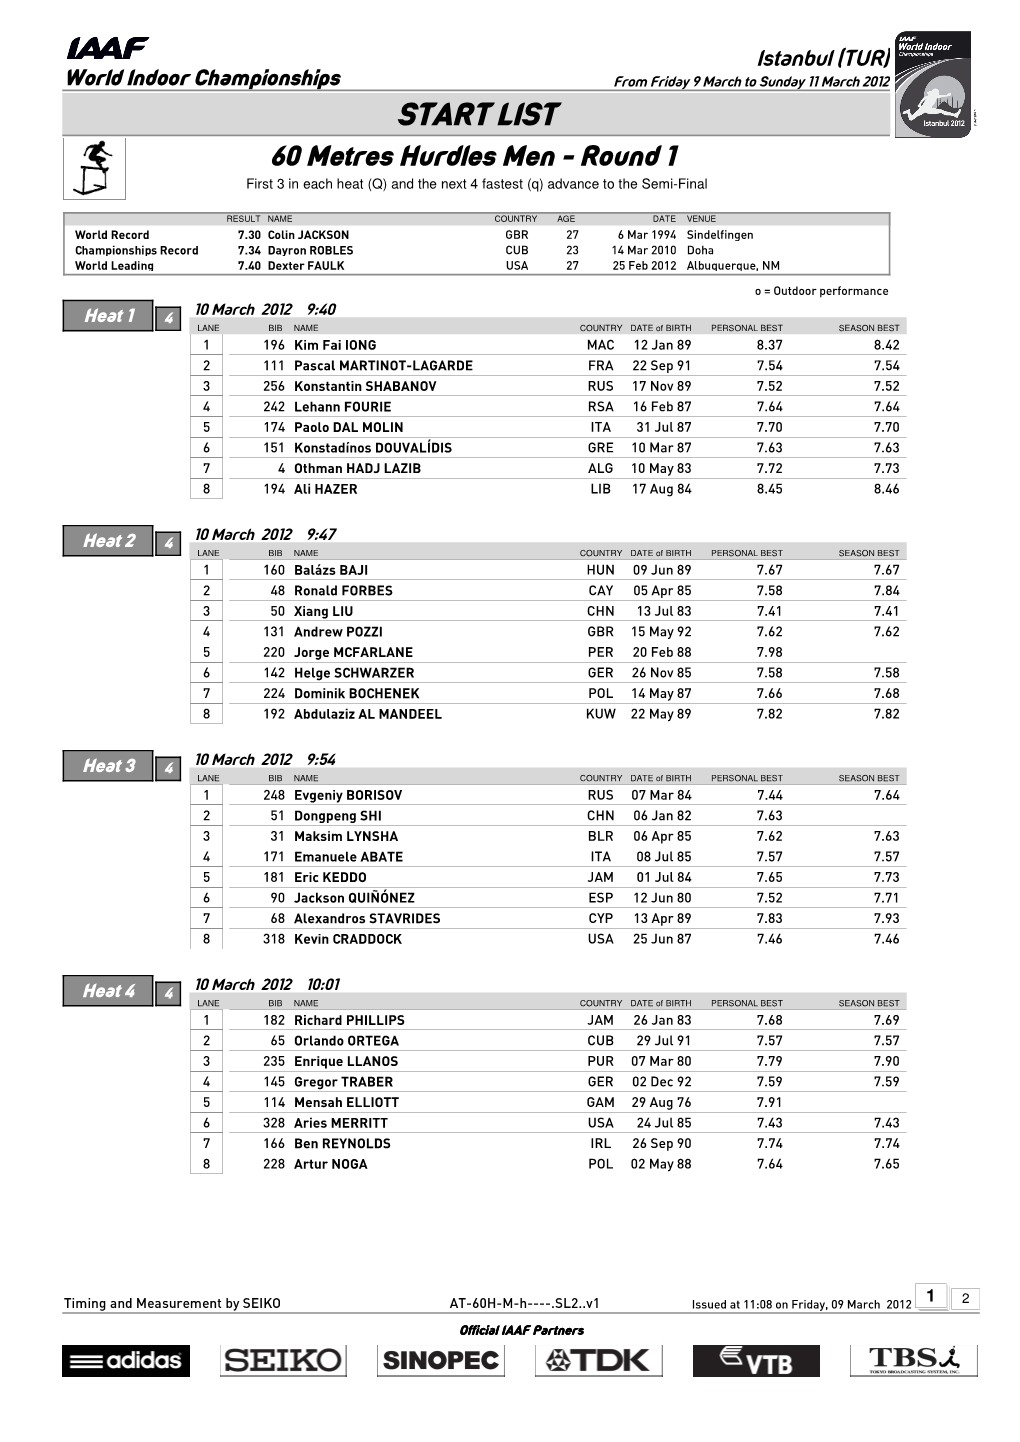 START LIST 60 Metres Hurdles Men - Round 1 First 3 in Each Heat (Q) and the Next 4 Fastest (Q) Advance to the Semi-Final